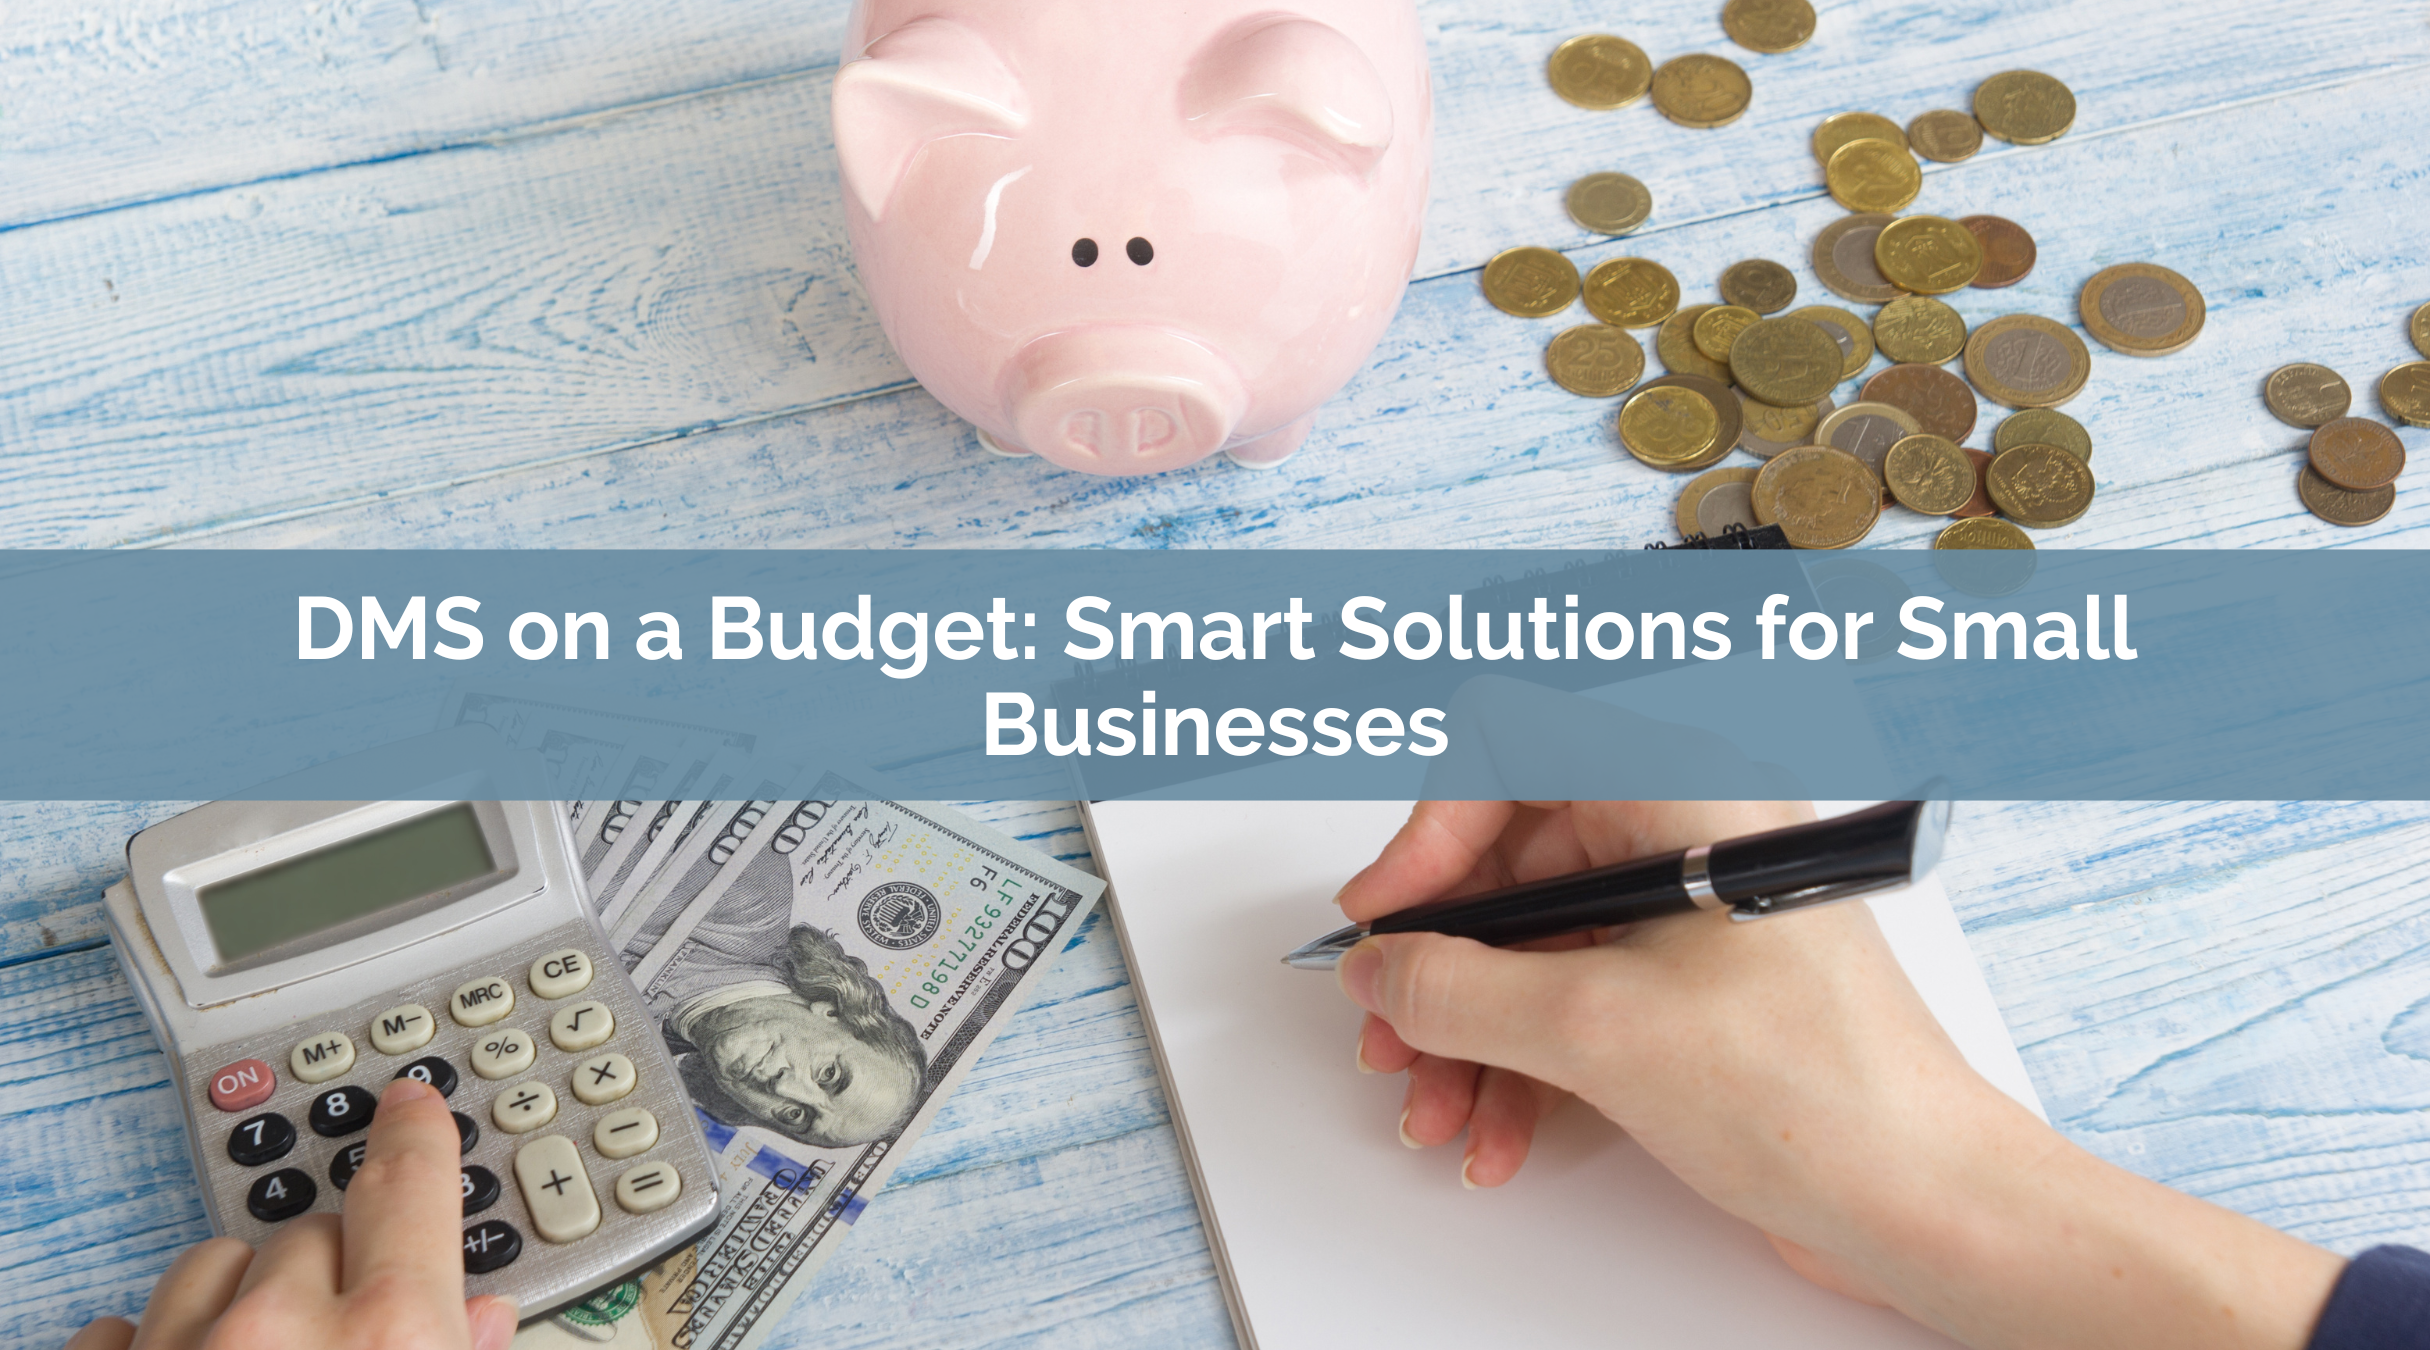 DMS on a Budget: Smart Solutions for Small Businesses